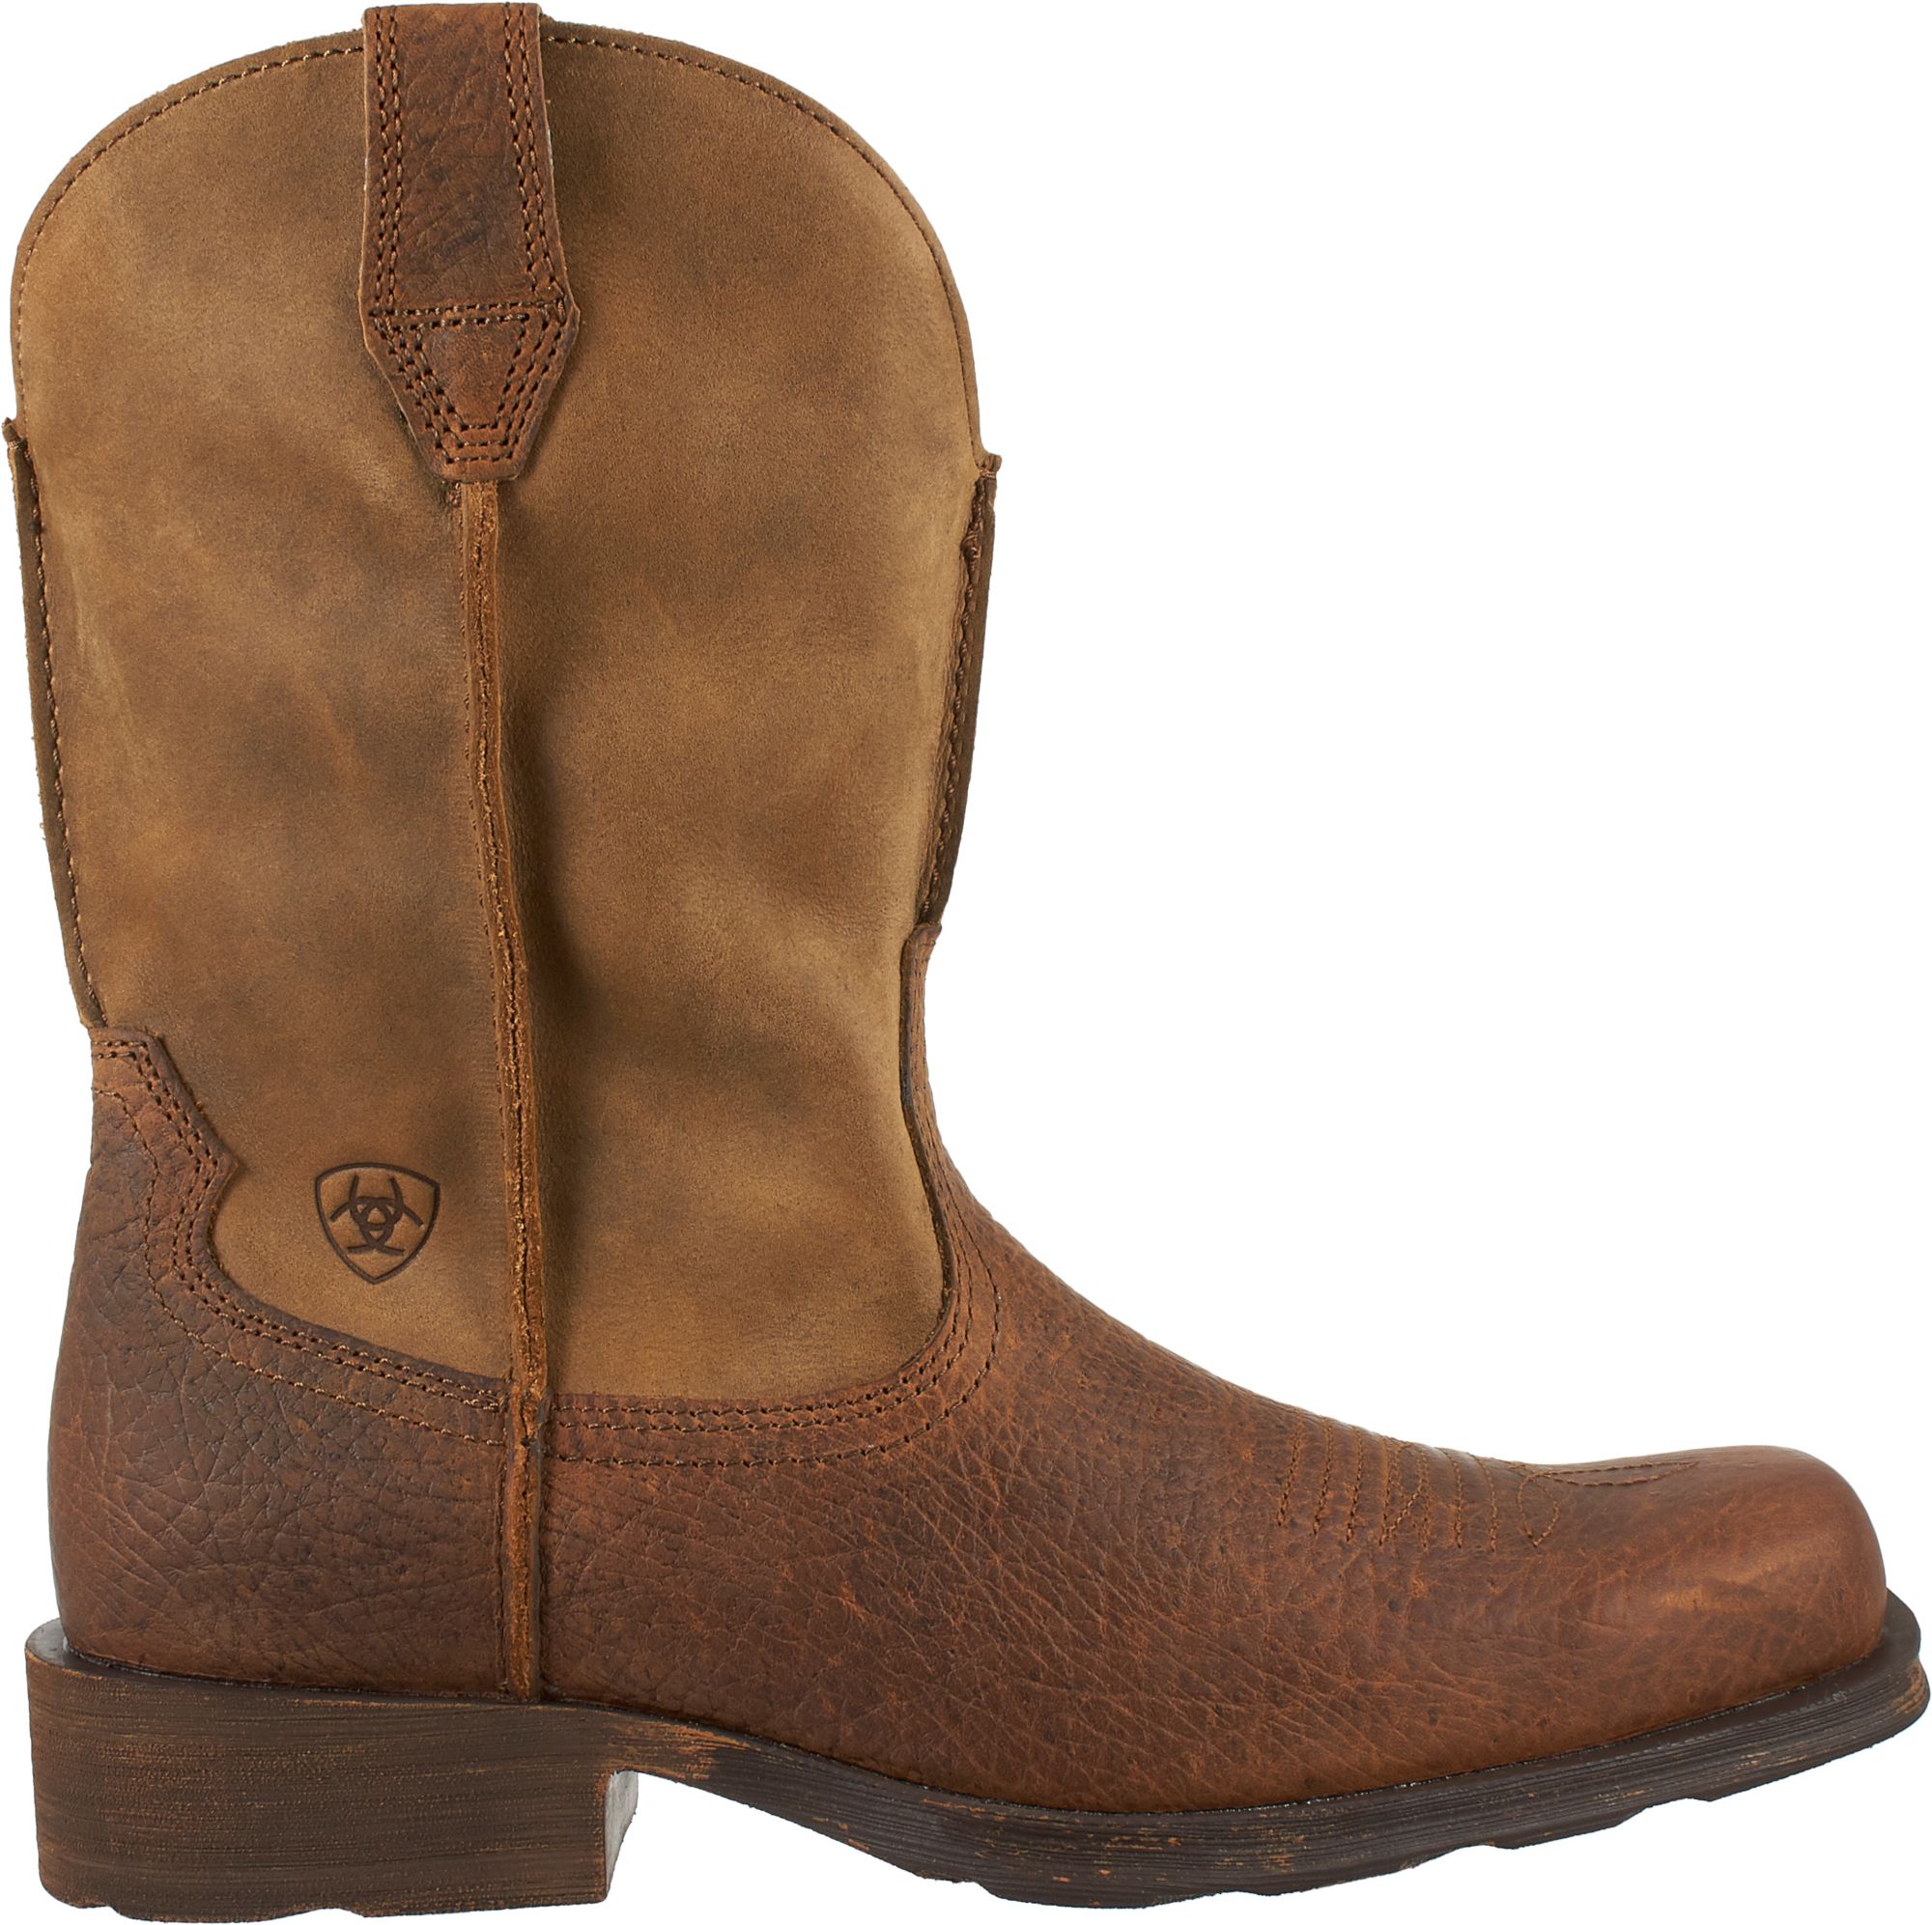 ariat boots for sale near me